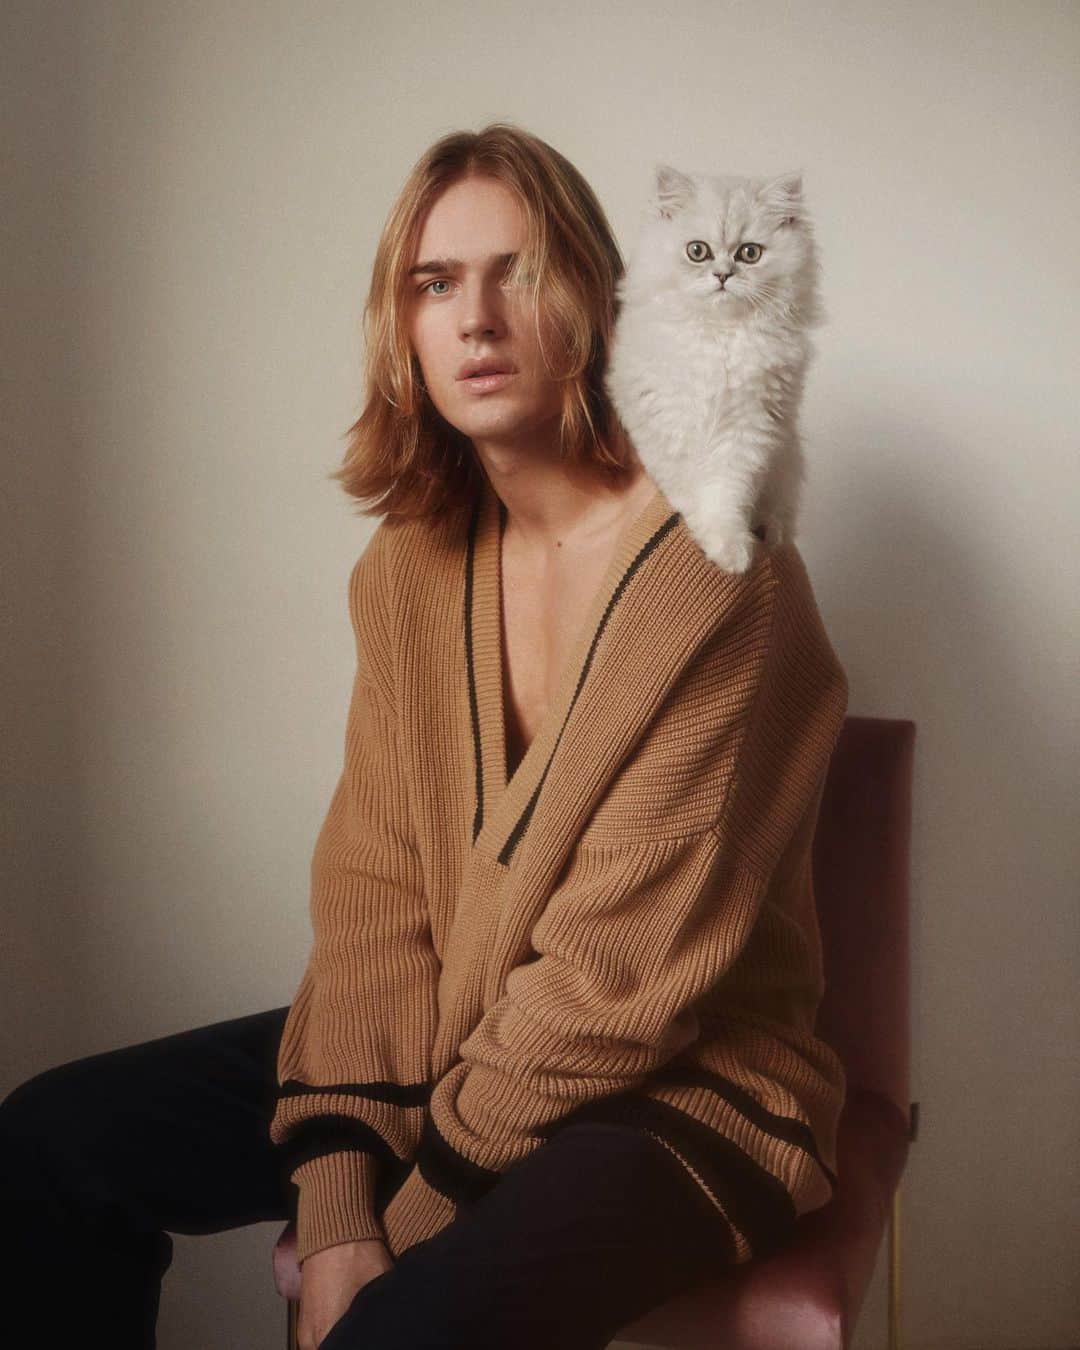 Ton Heukelsのインスタグラム：「After all these years of modeling I still don’t pose as well as the cat #throwback」